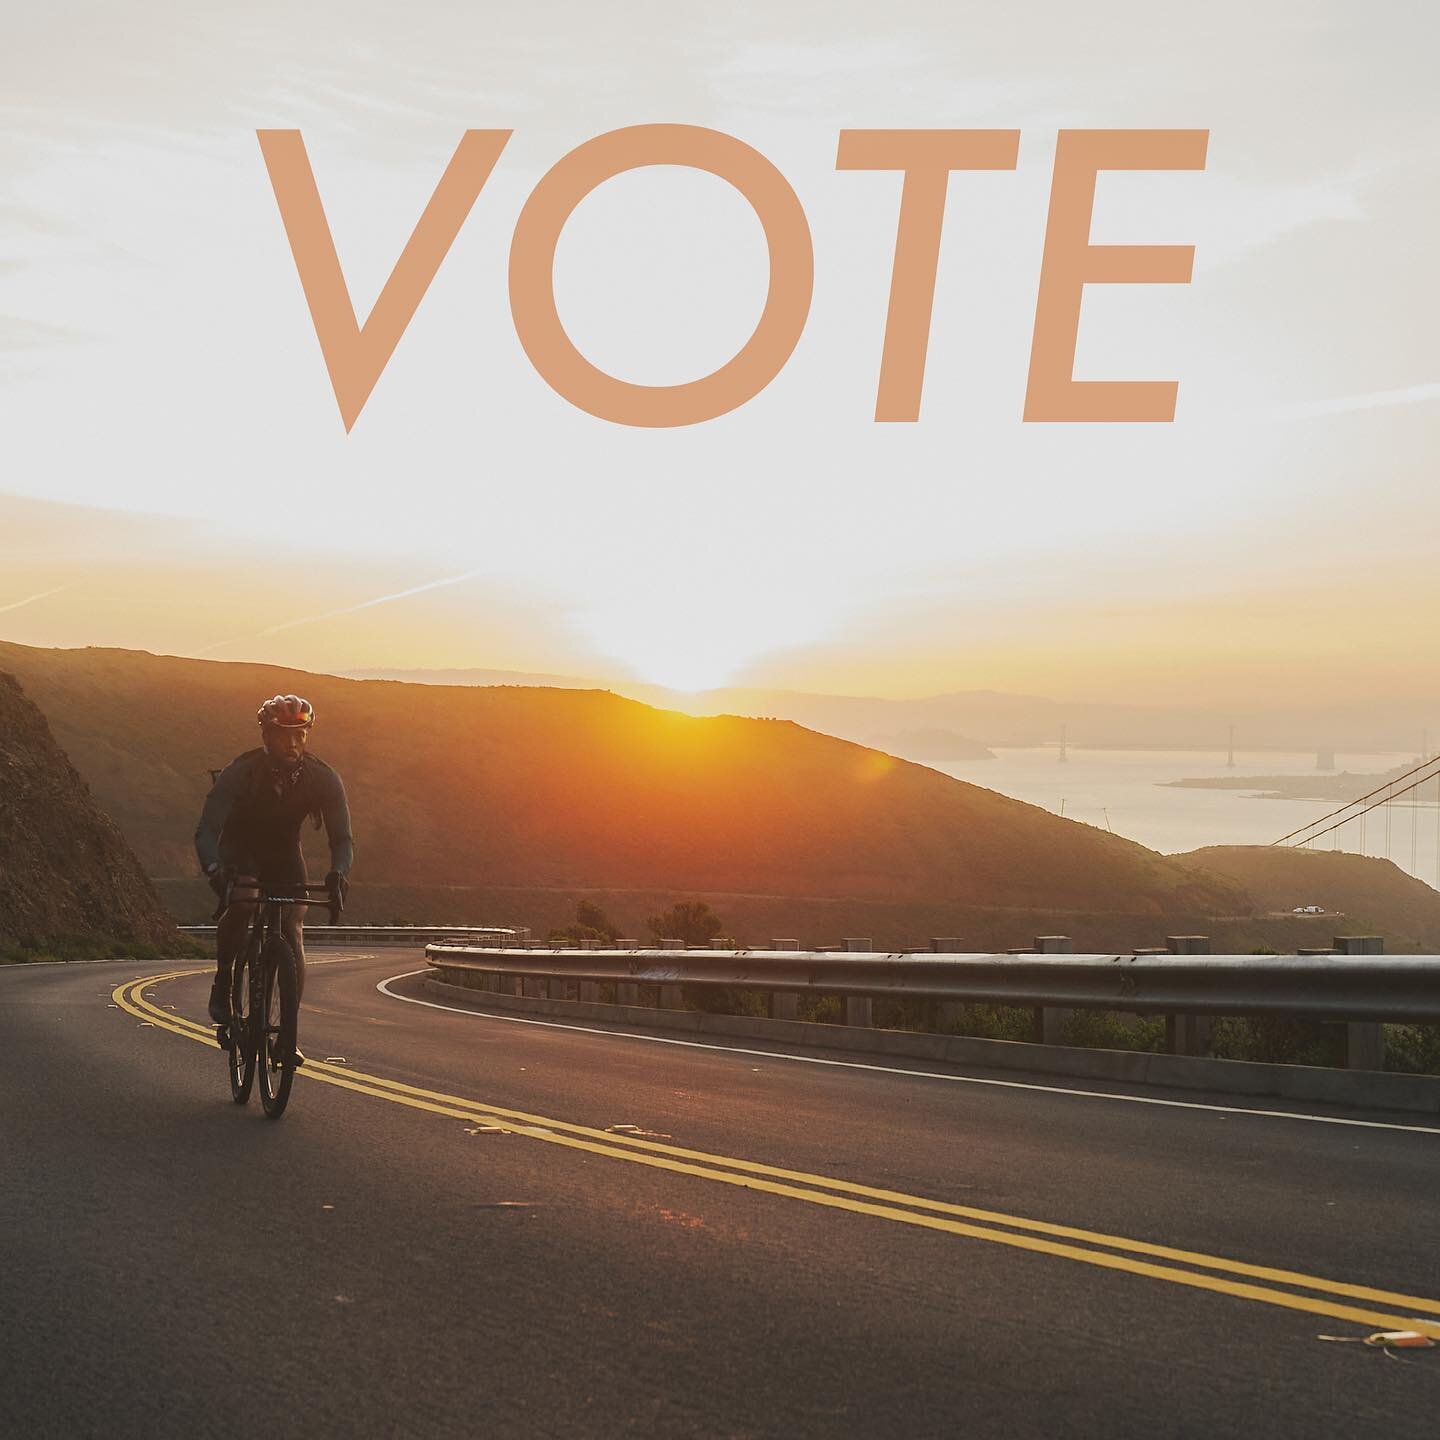 We believe in being the change we want to see both on and off the bike. Today, that means voting. Be sure to cast your ballot to help create the future you want for yourself, your family, and your community.
#vote #electionday #ivoted